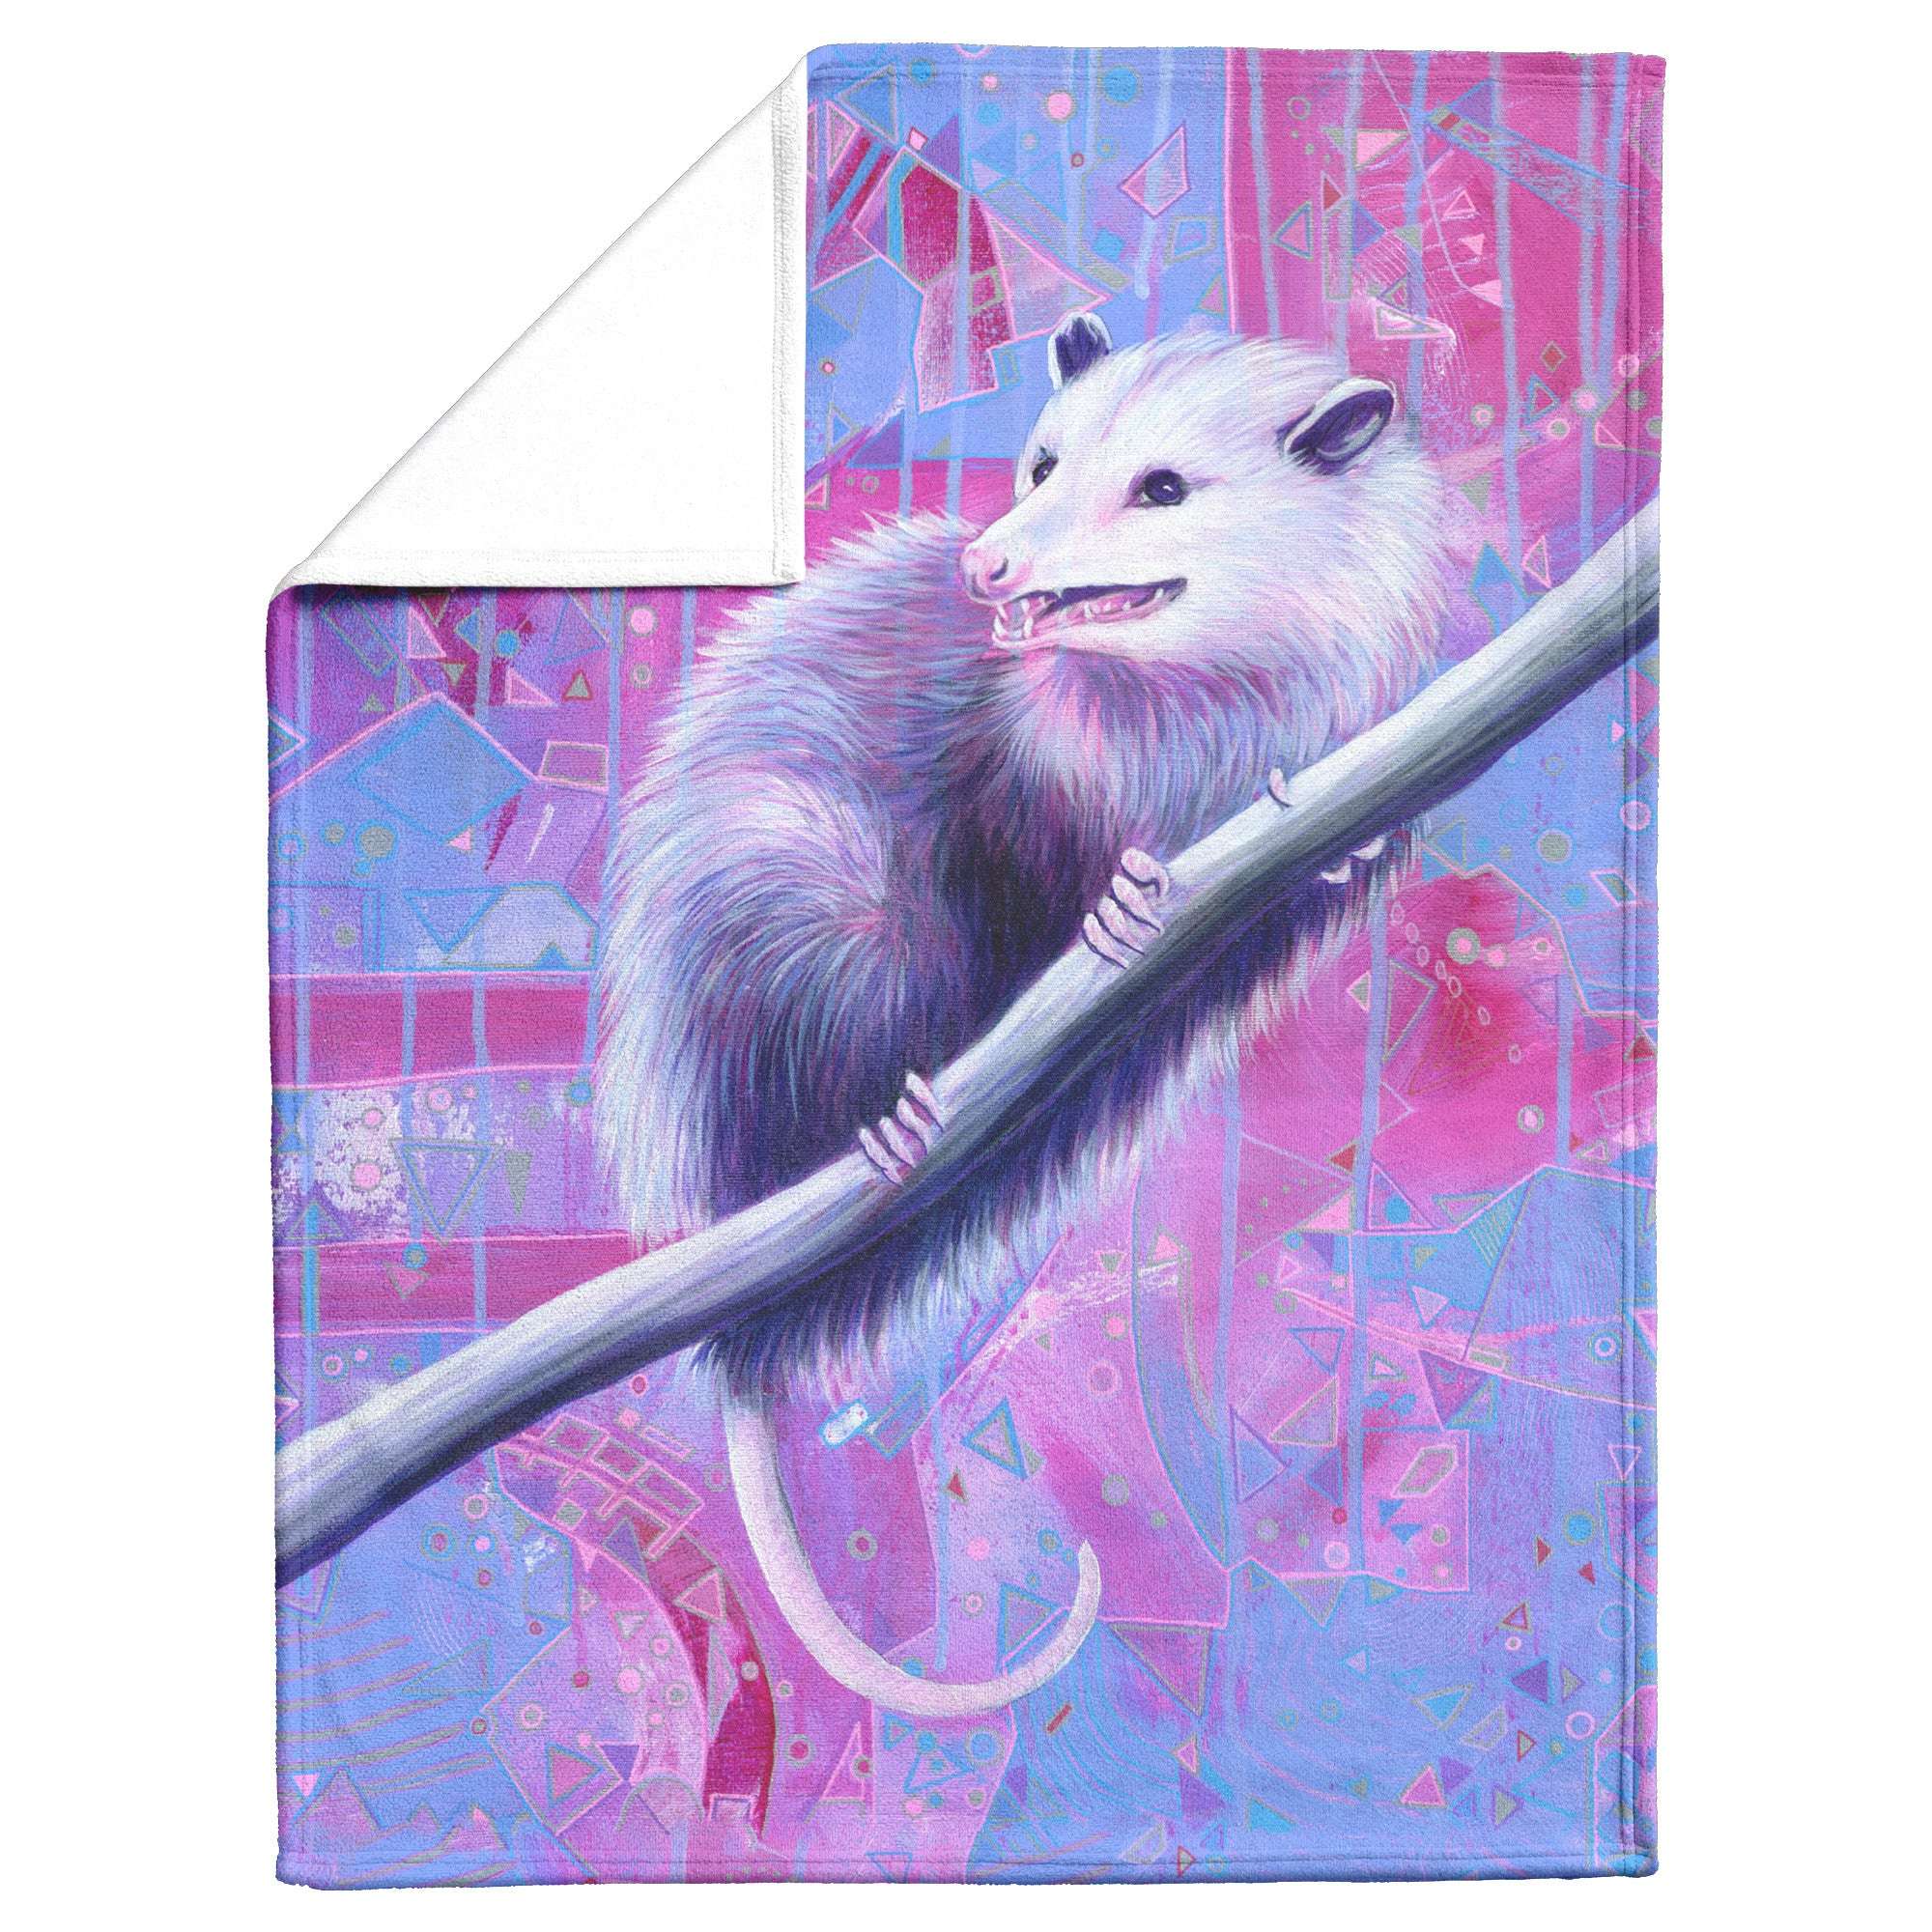 An Opossum Blanket featuring an animal climbing a diagonal branch, set against a vibrant pink and blue abstract geometric background on a notebook cover.